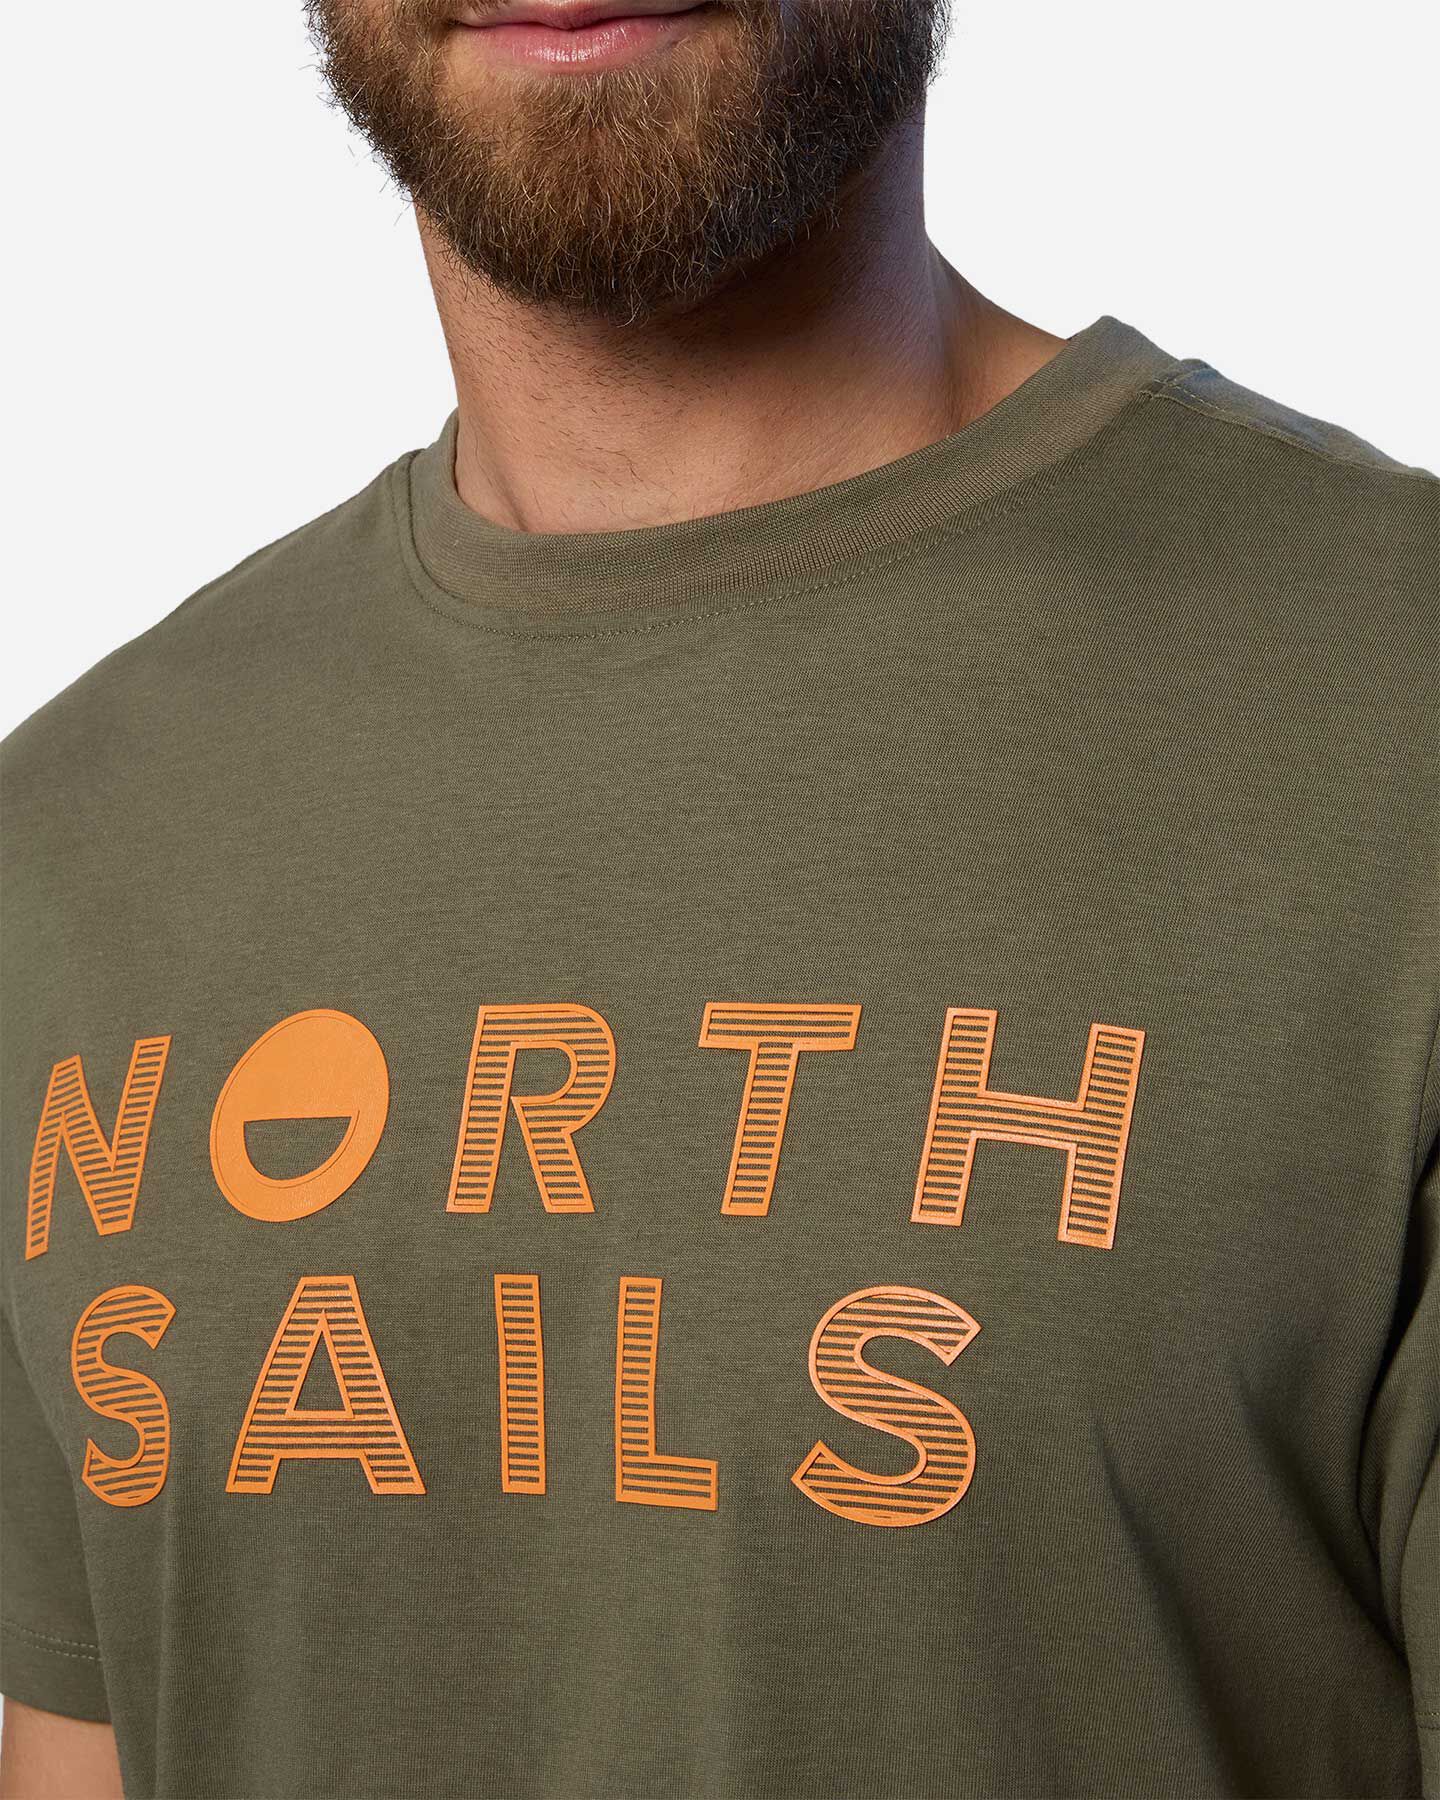  T-Shirt NORTH SAILS LINEAR LOGO M S5684006|0441|S scatto 4